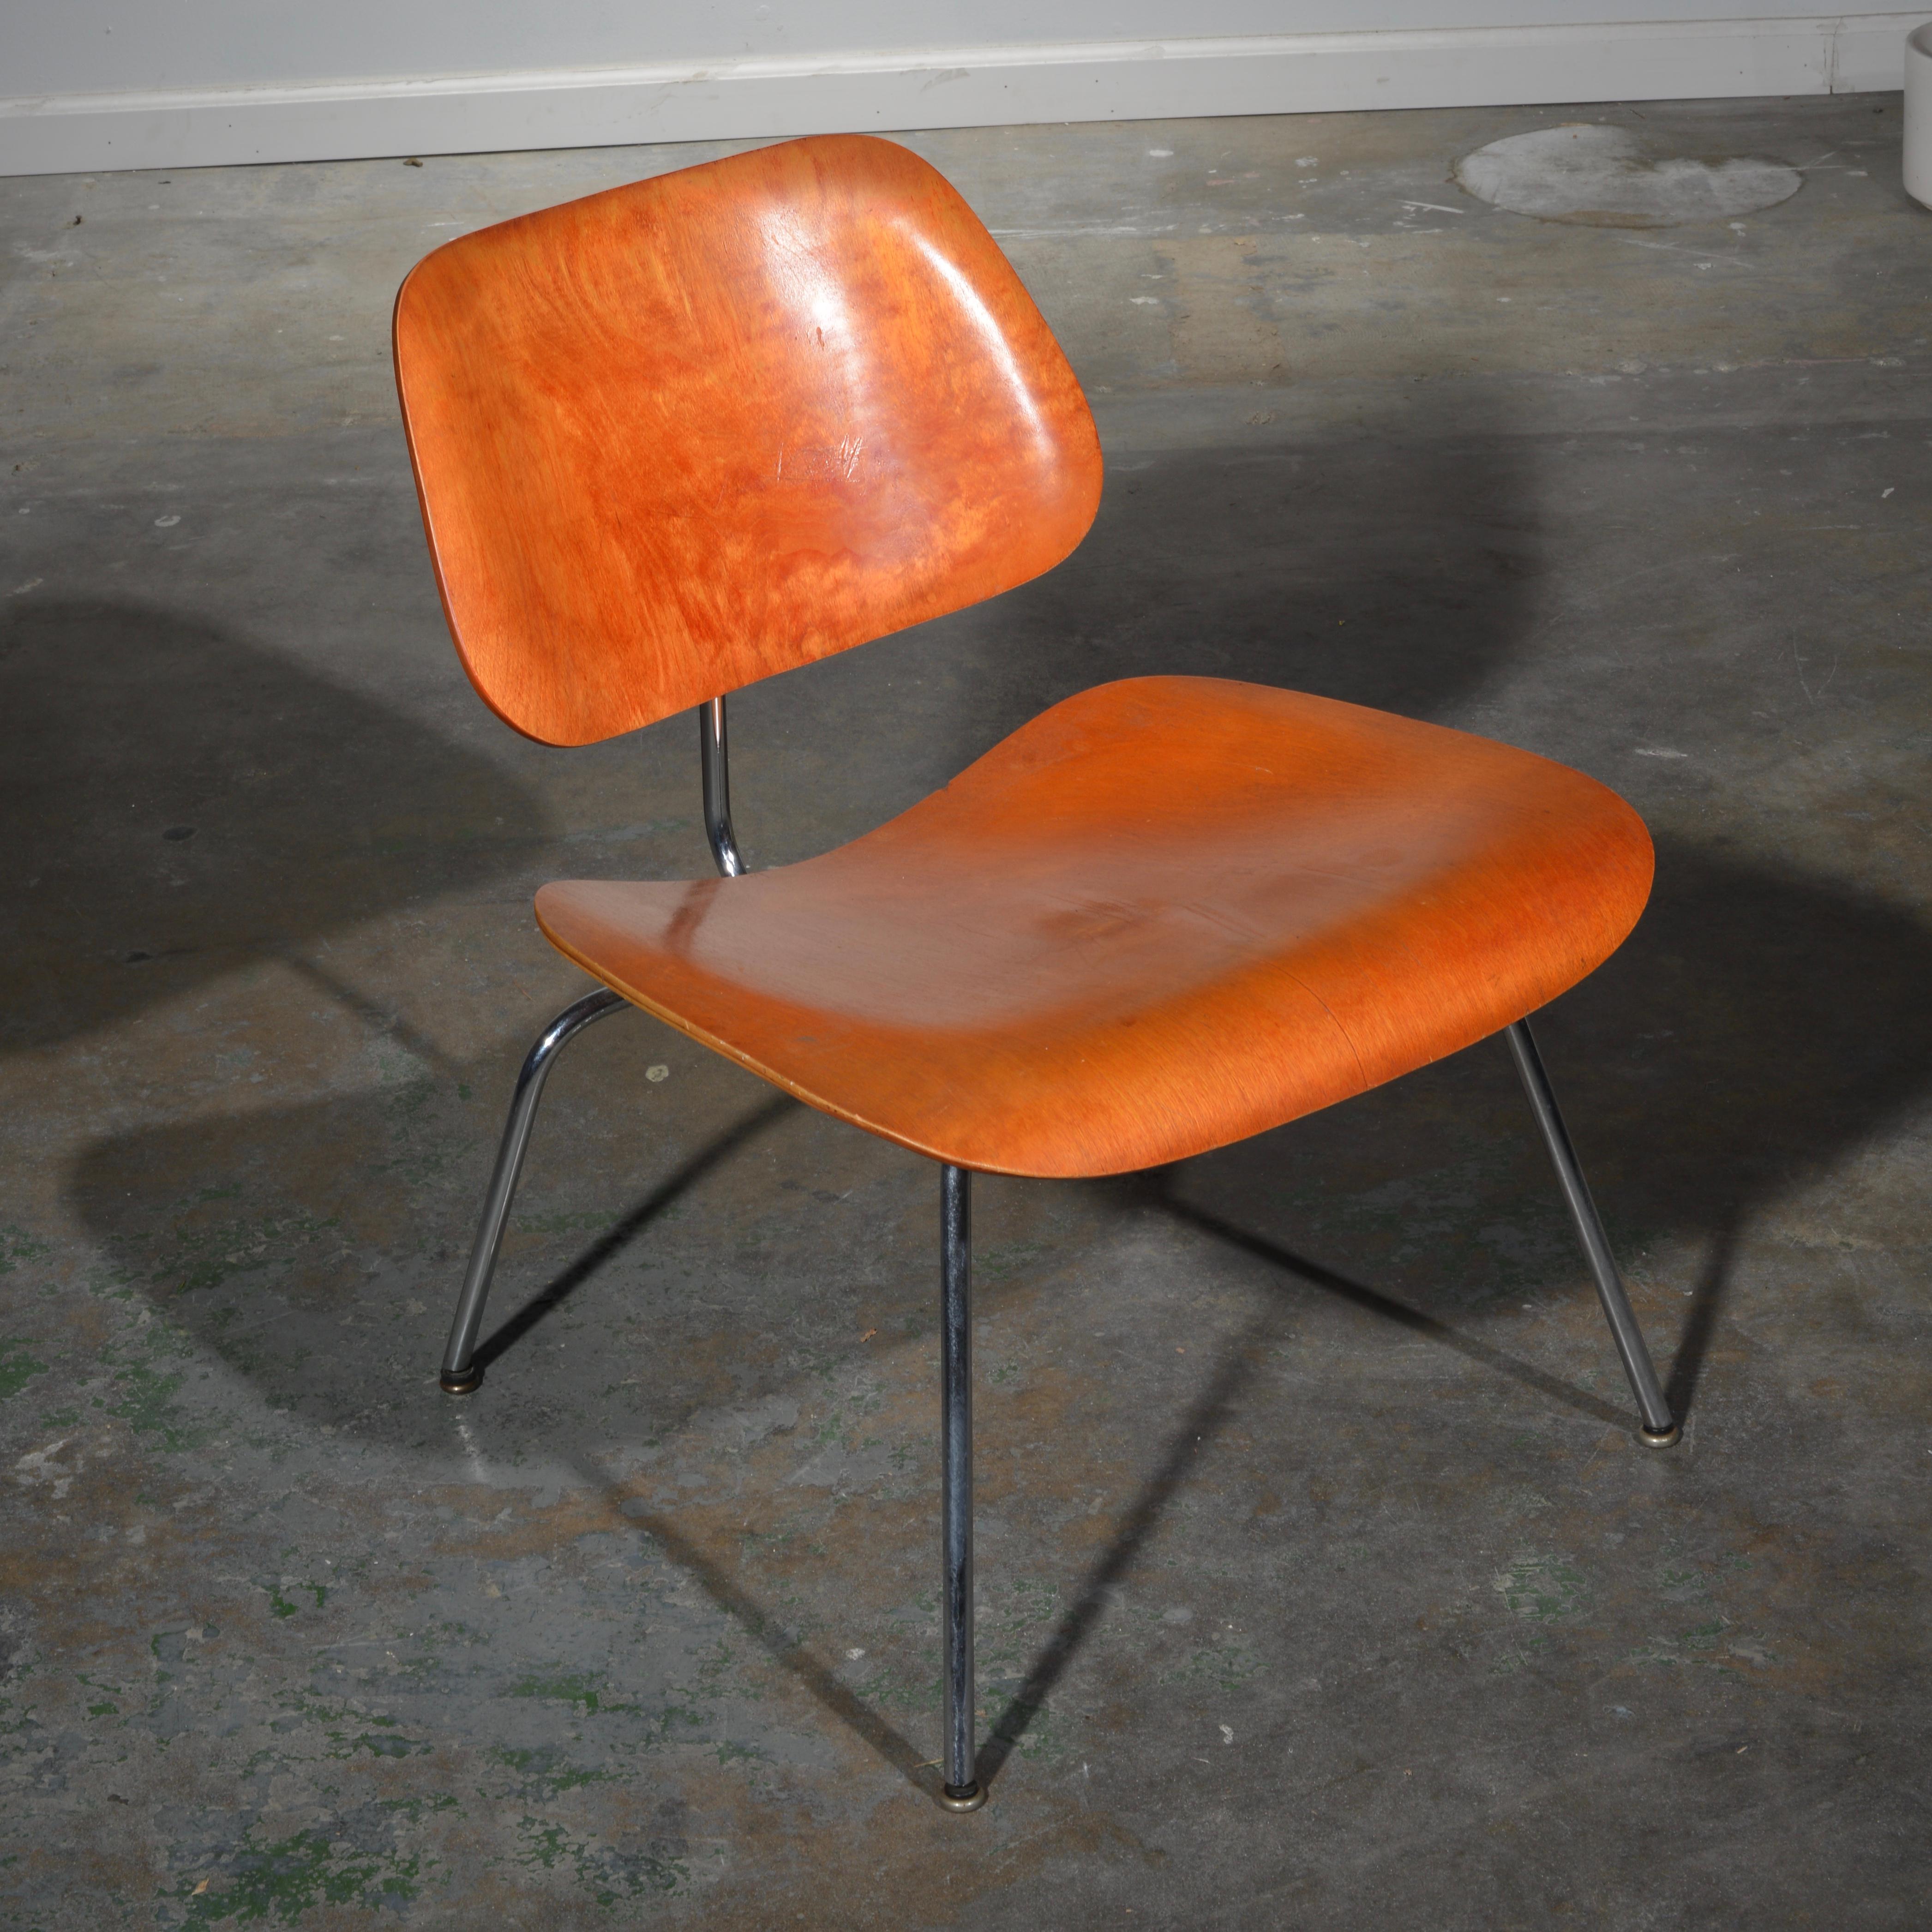 This is an extremely rare first year Evans production LCM chair designed by Charles and Ray Eames. This LCM has its original red aniline dye finish, chrome finish legs, Evans label and domes of silence glides.